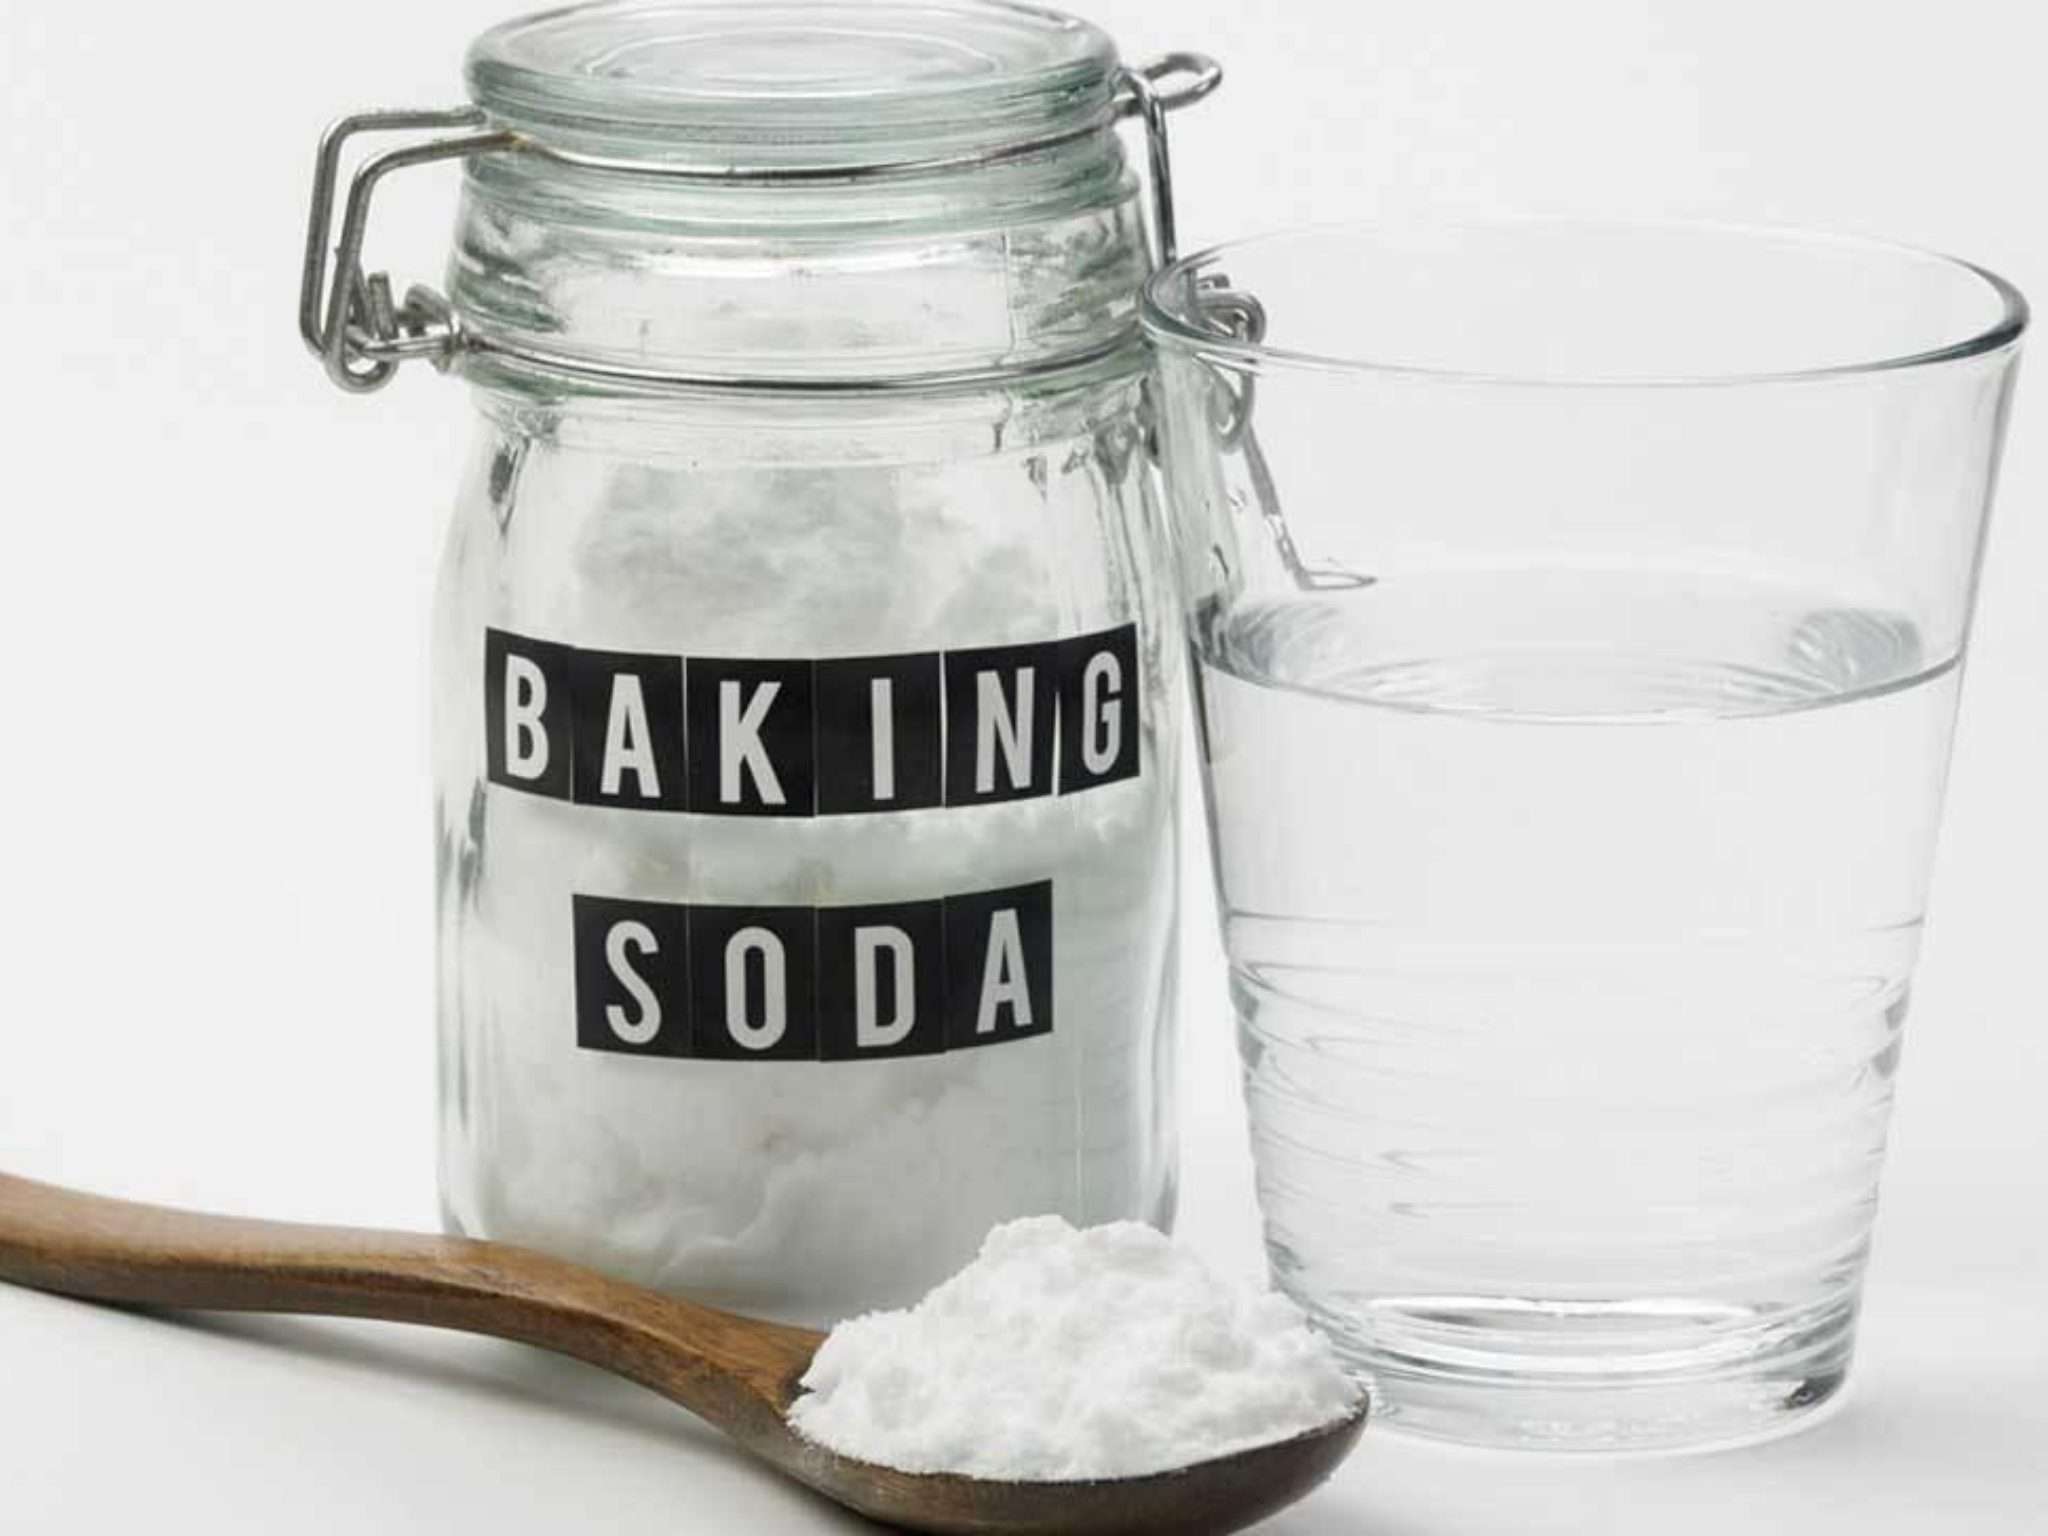 10 Benefits and Uses for Baking Soda